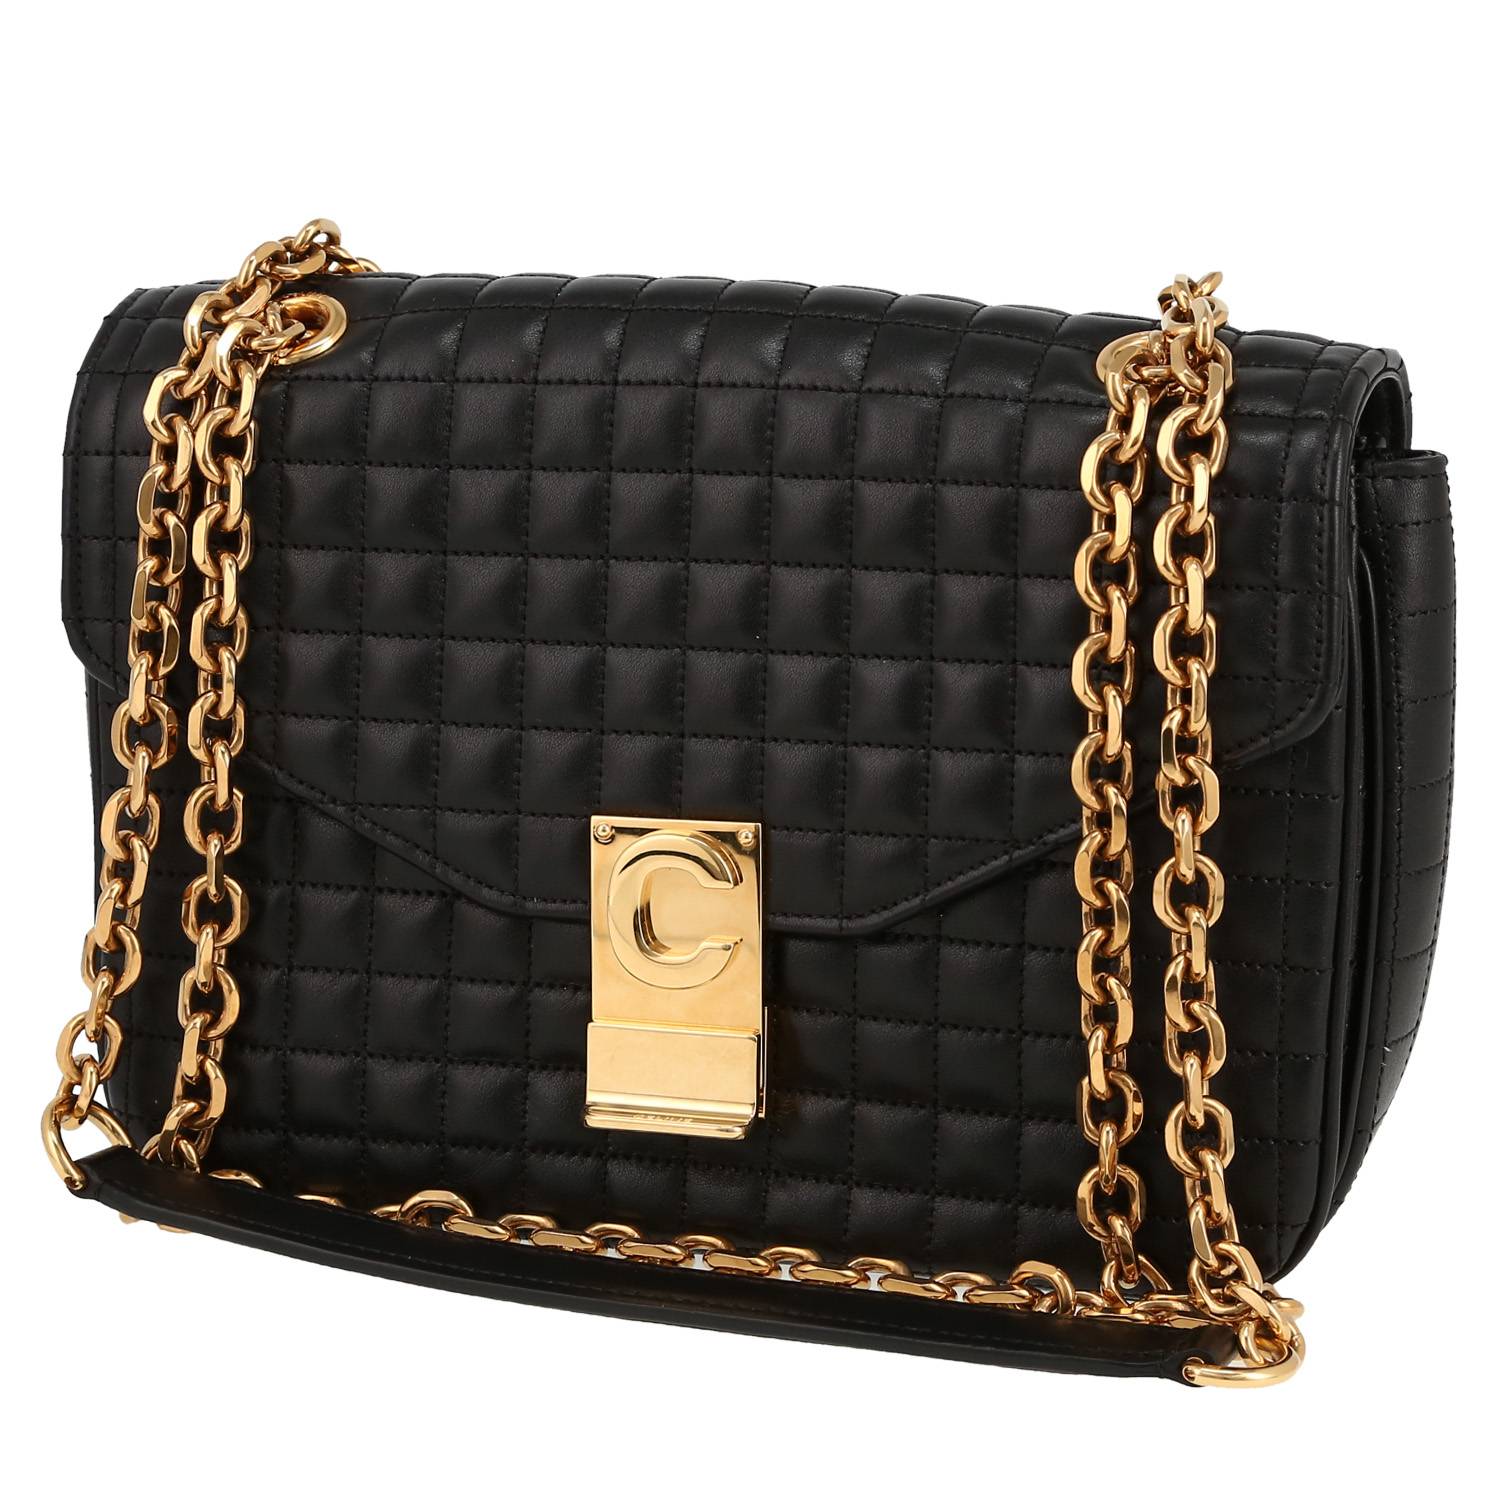 C Bag Handbag In Black Quilted Leather And Black Leather